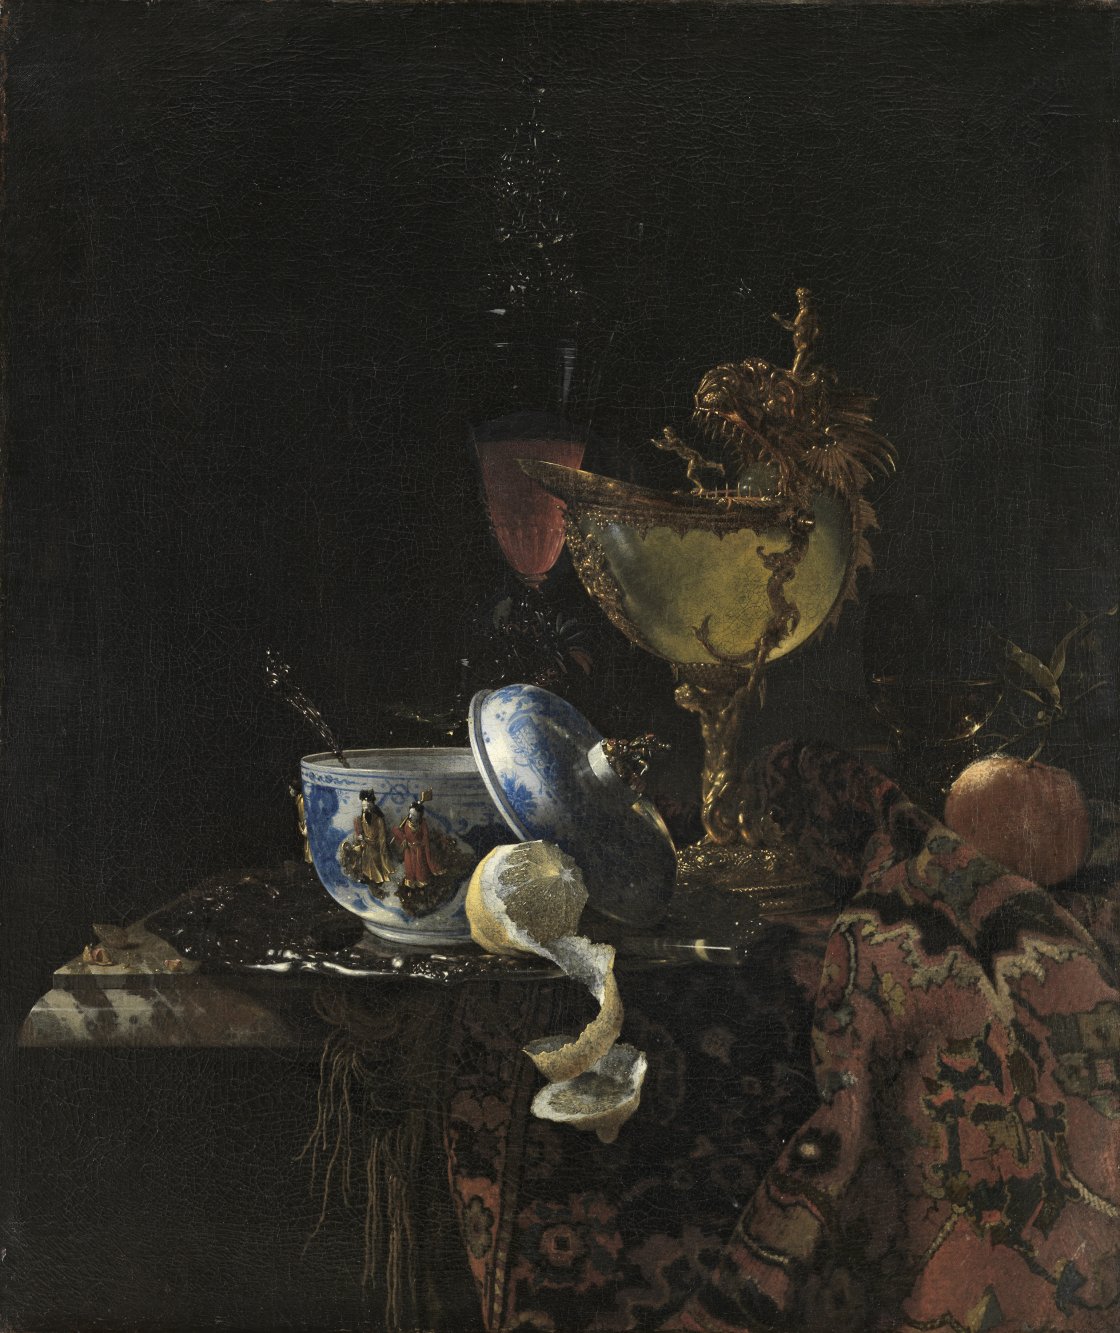 Still Life with a Chinese Bowl, a Nautilus Cup and other Objects. Bodegón con cuenco chino, copa nautilo y otros objetos, 1662